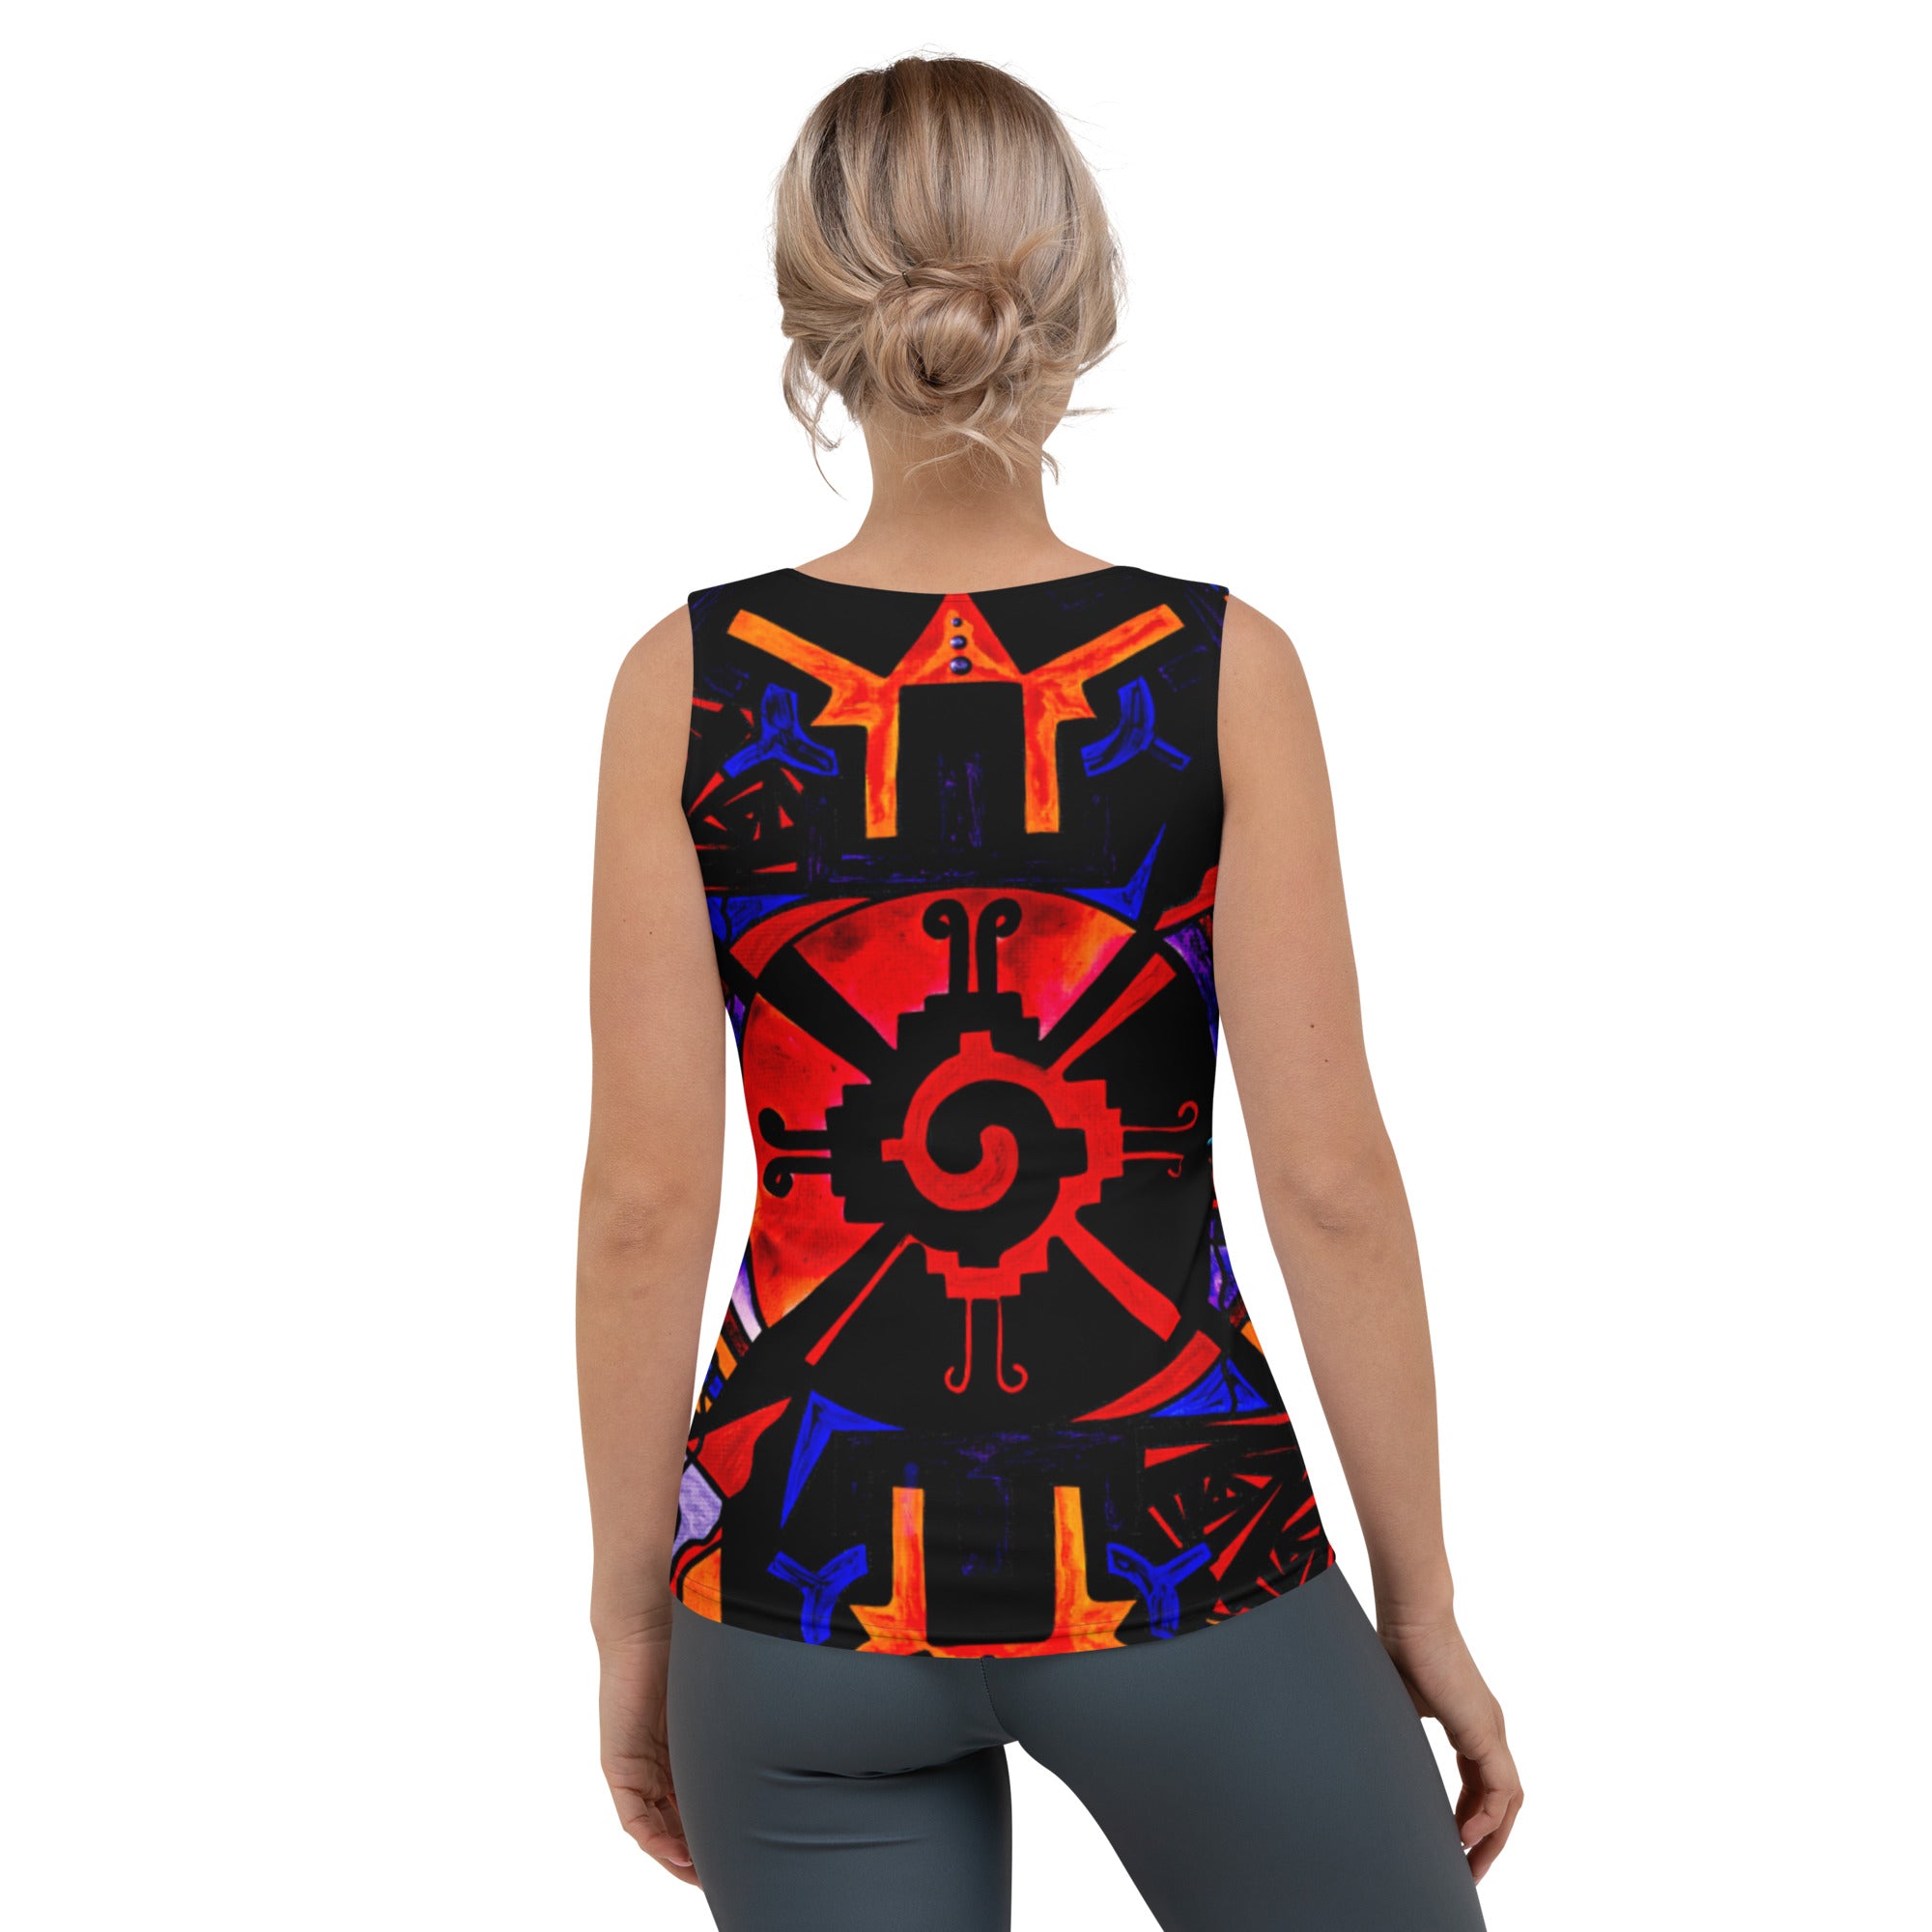 shop-our-official-alnilam-strength-grid-sublimation-cut-sew-tank-top-online-hot-sale_1.jpg